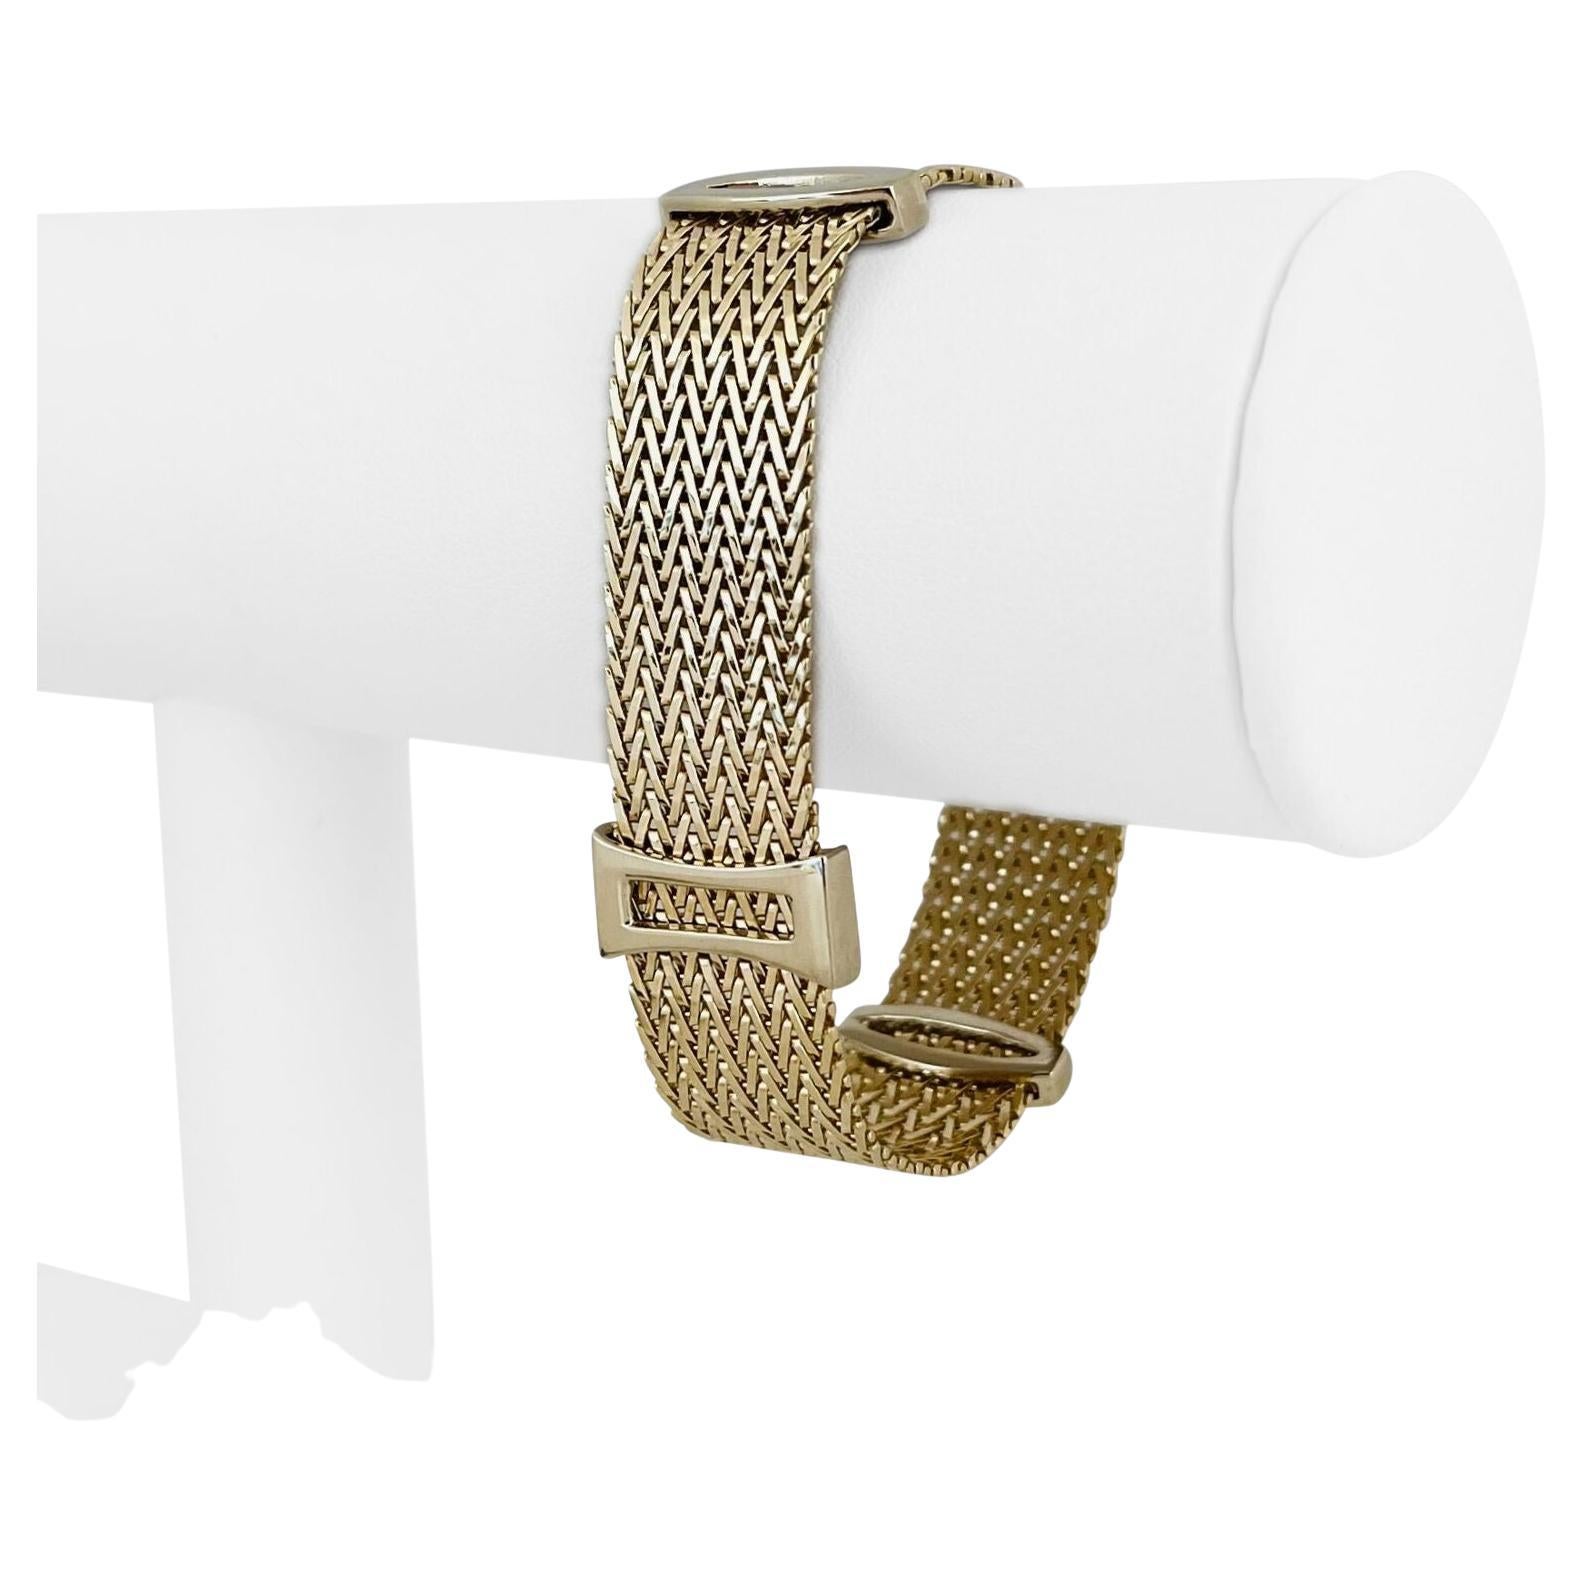 14 Karat Yellow and White Gold Solid Mesh Station Bracelet, Italy